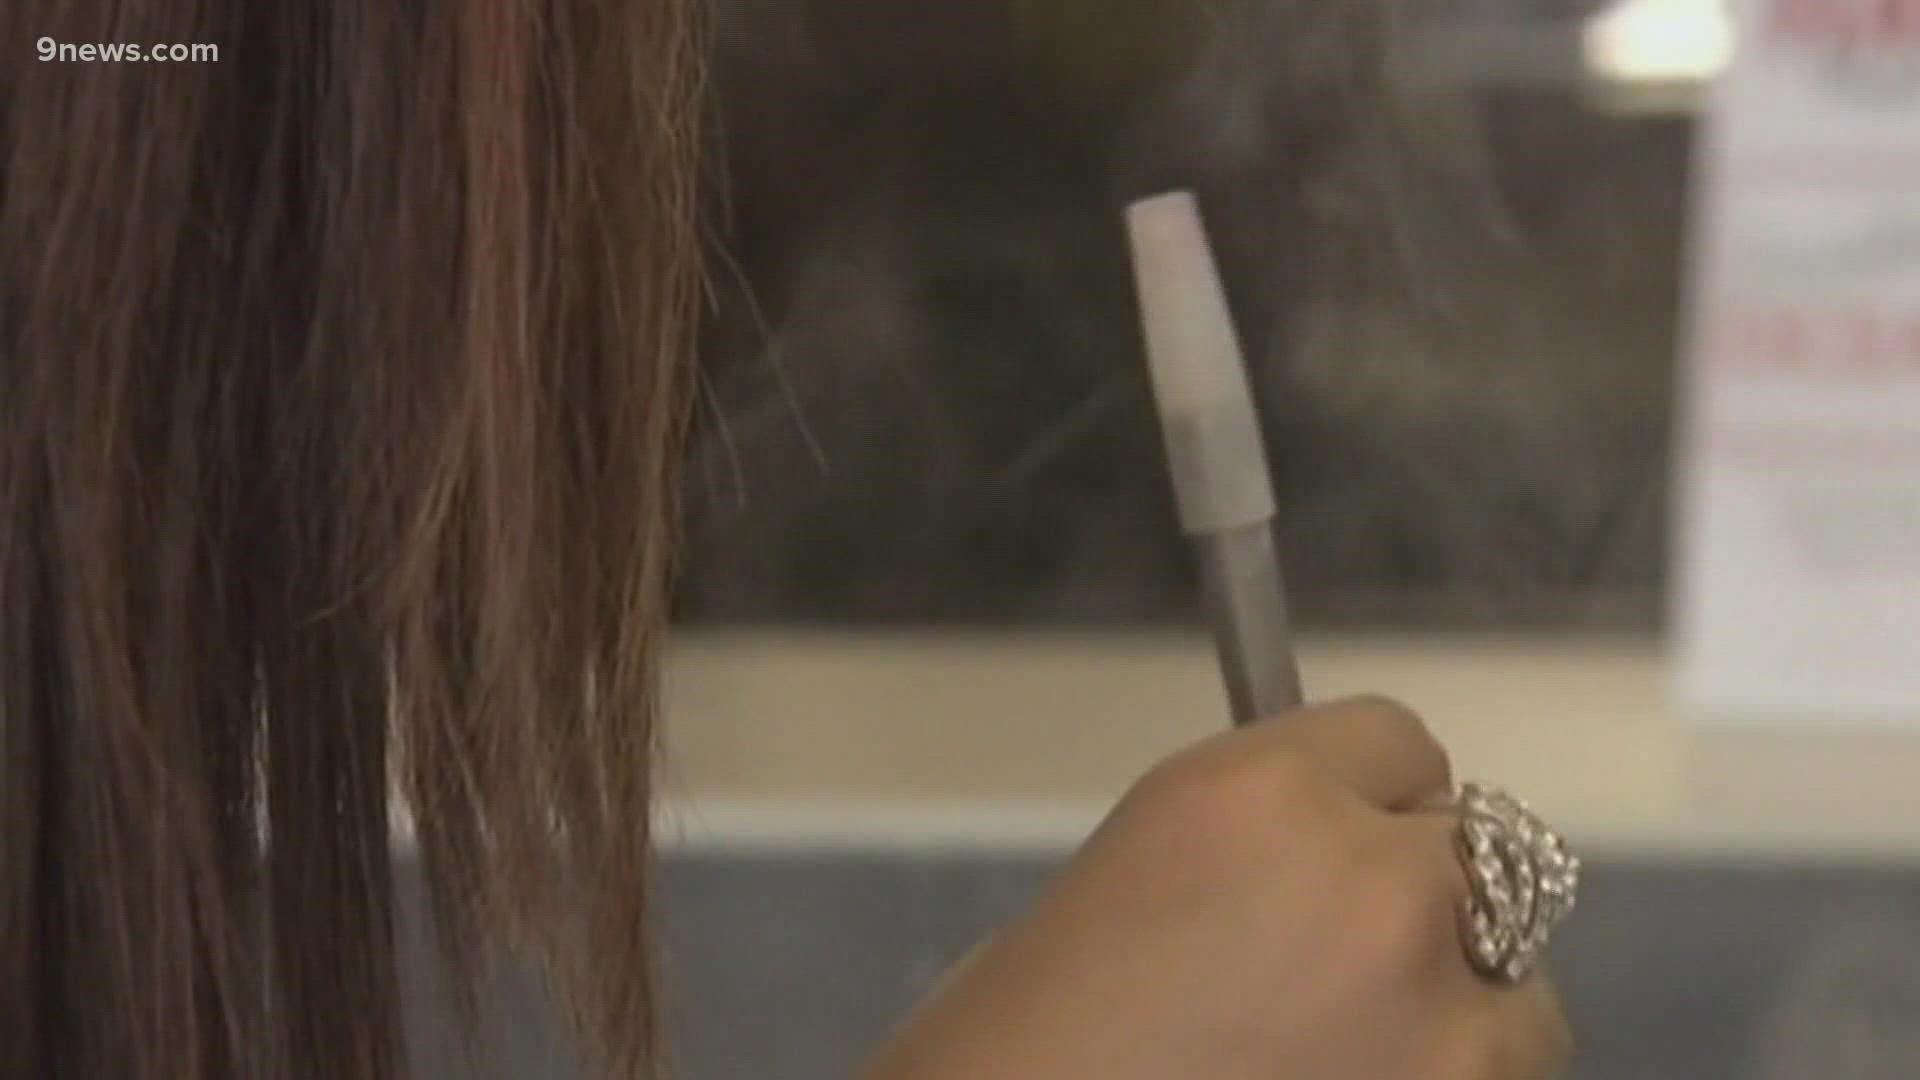 An ordinance to stop the sale of flavored tobacco products in Denver is moving forward with a final vote expected next week.